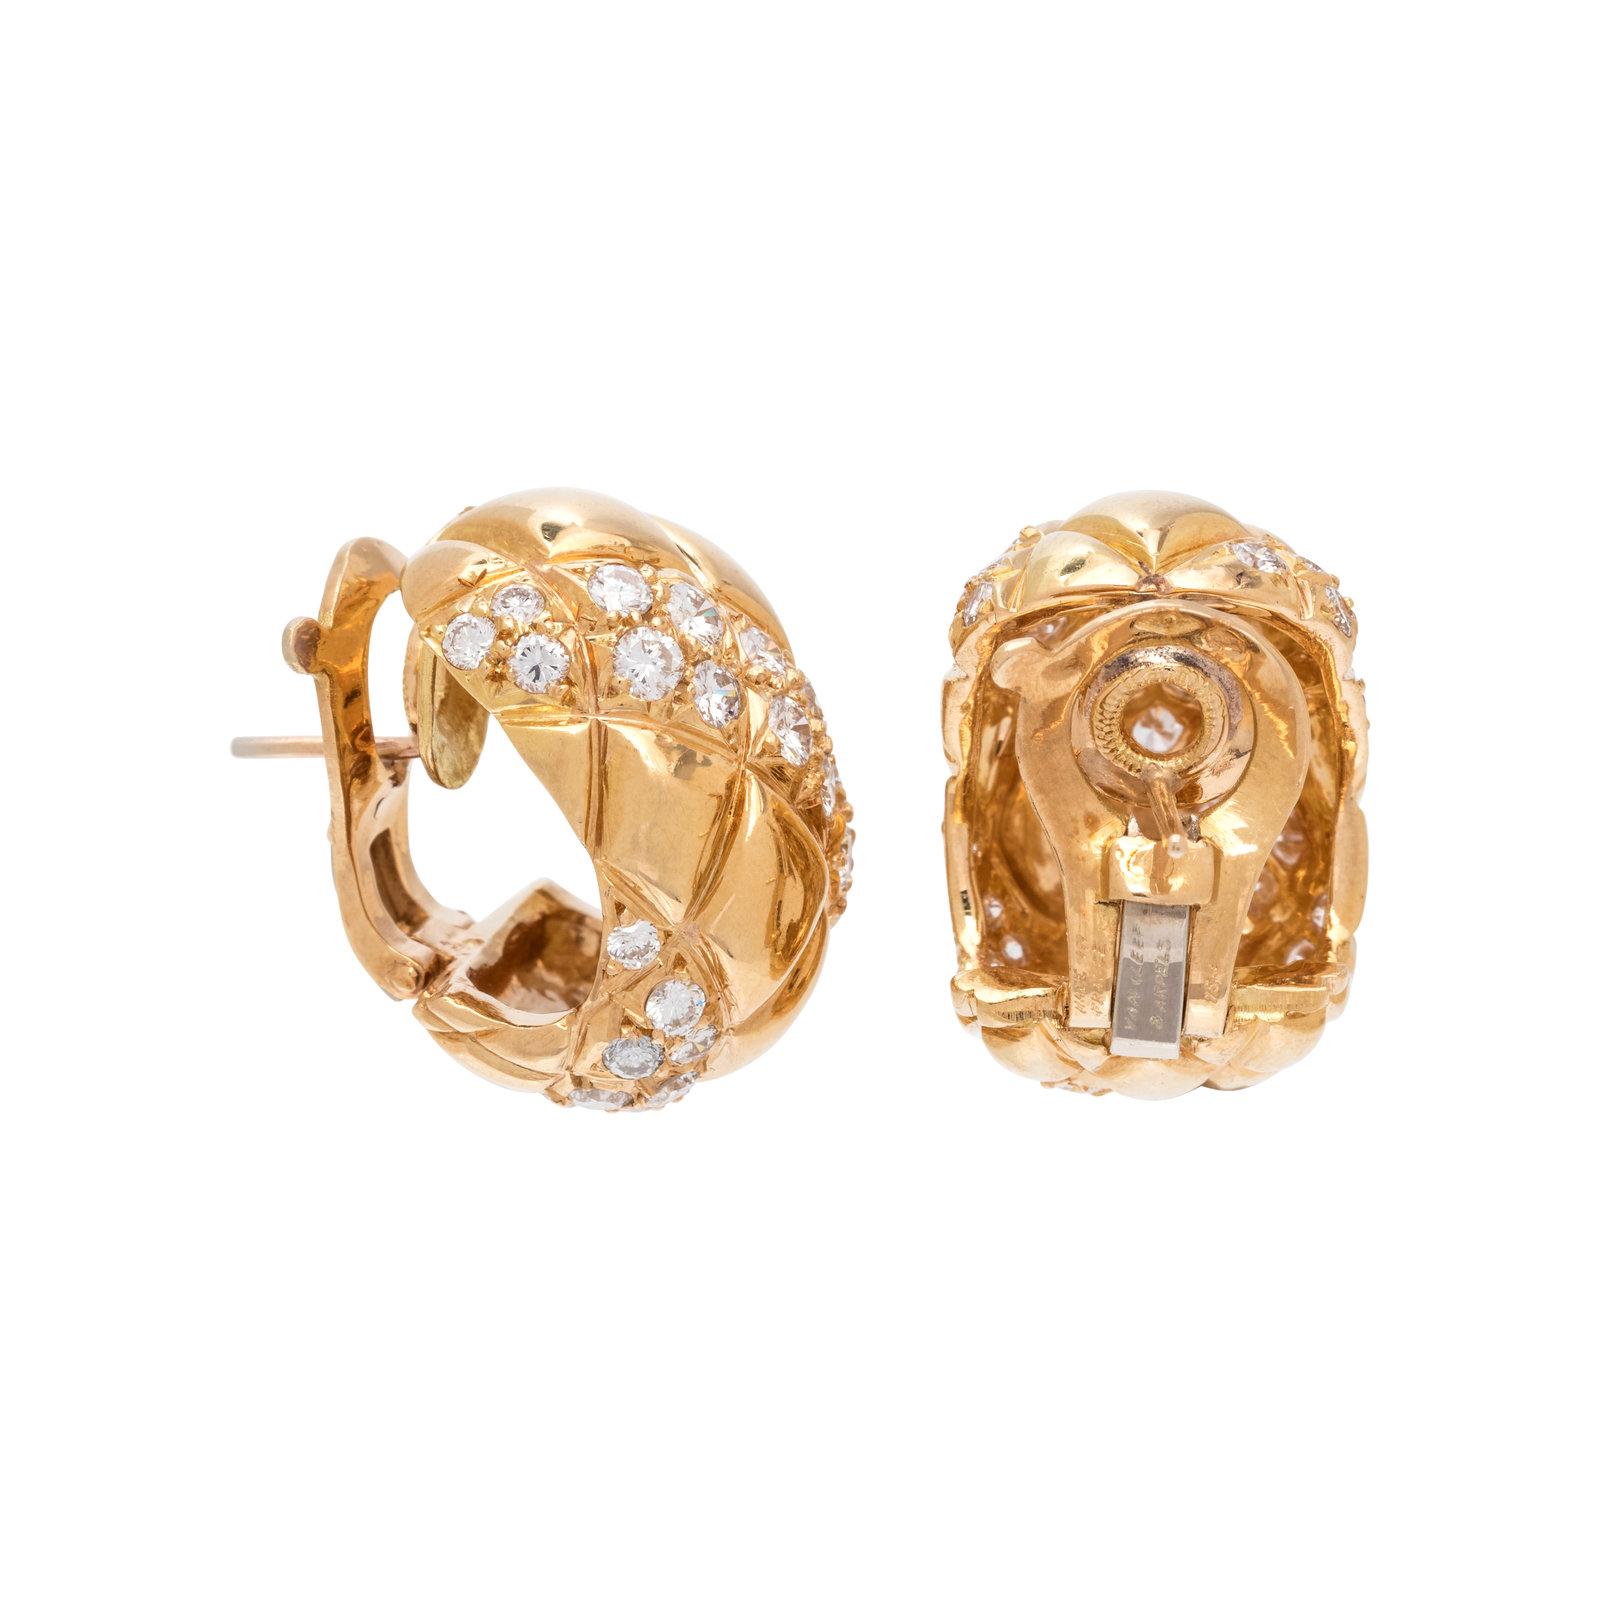 These Van Cleef & Arpel half hoop earrings feature a quilted pattern containing 62 round brilliant cut diamonds weighing approximately 1.85 carats set in 18K yellow gold. Posts with clip backs. 3/4 inch long. Signed Made in France Van Cleef & Arpels